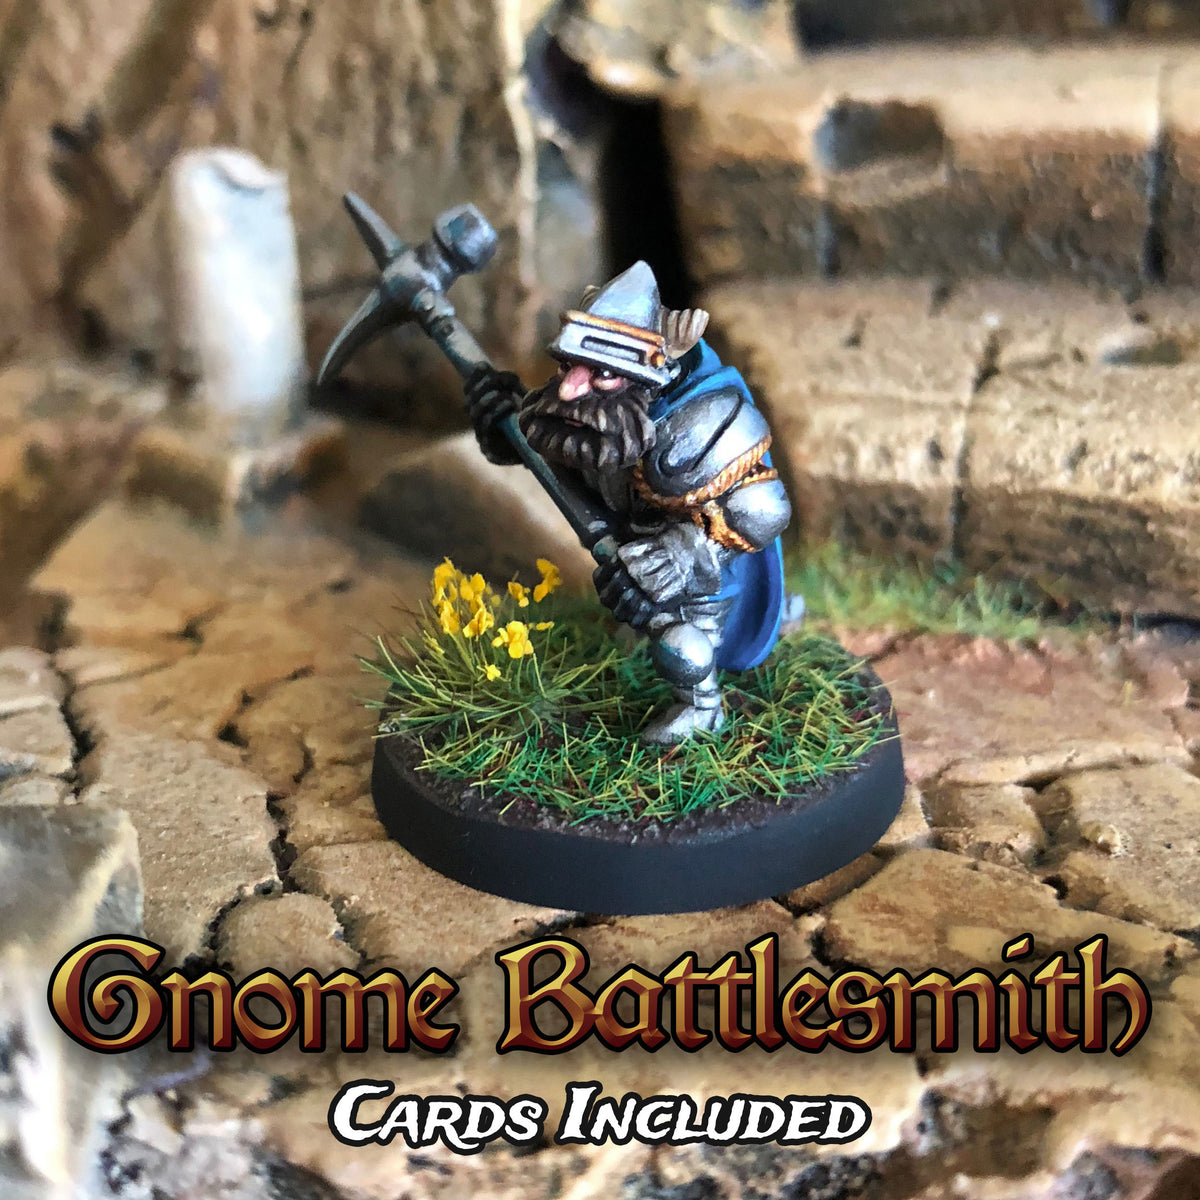 Gnome Battlesmith with Character Card and Upgrade Card. Miniature Metal King Studio Exit 23 Games Gnome Battlesmith with Character Card and Upgrade Card.